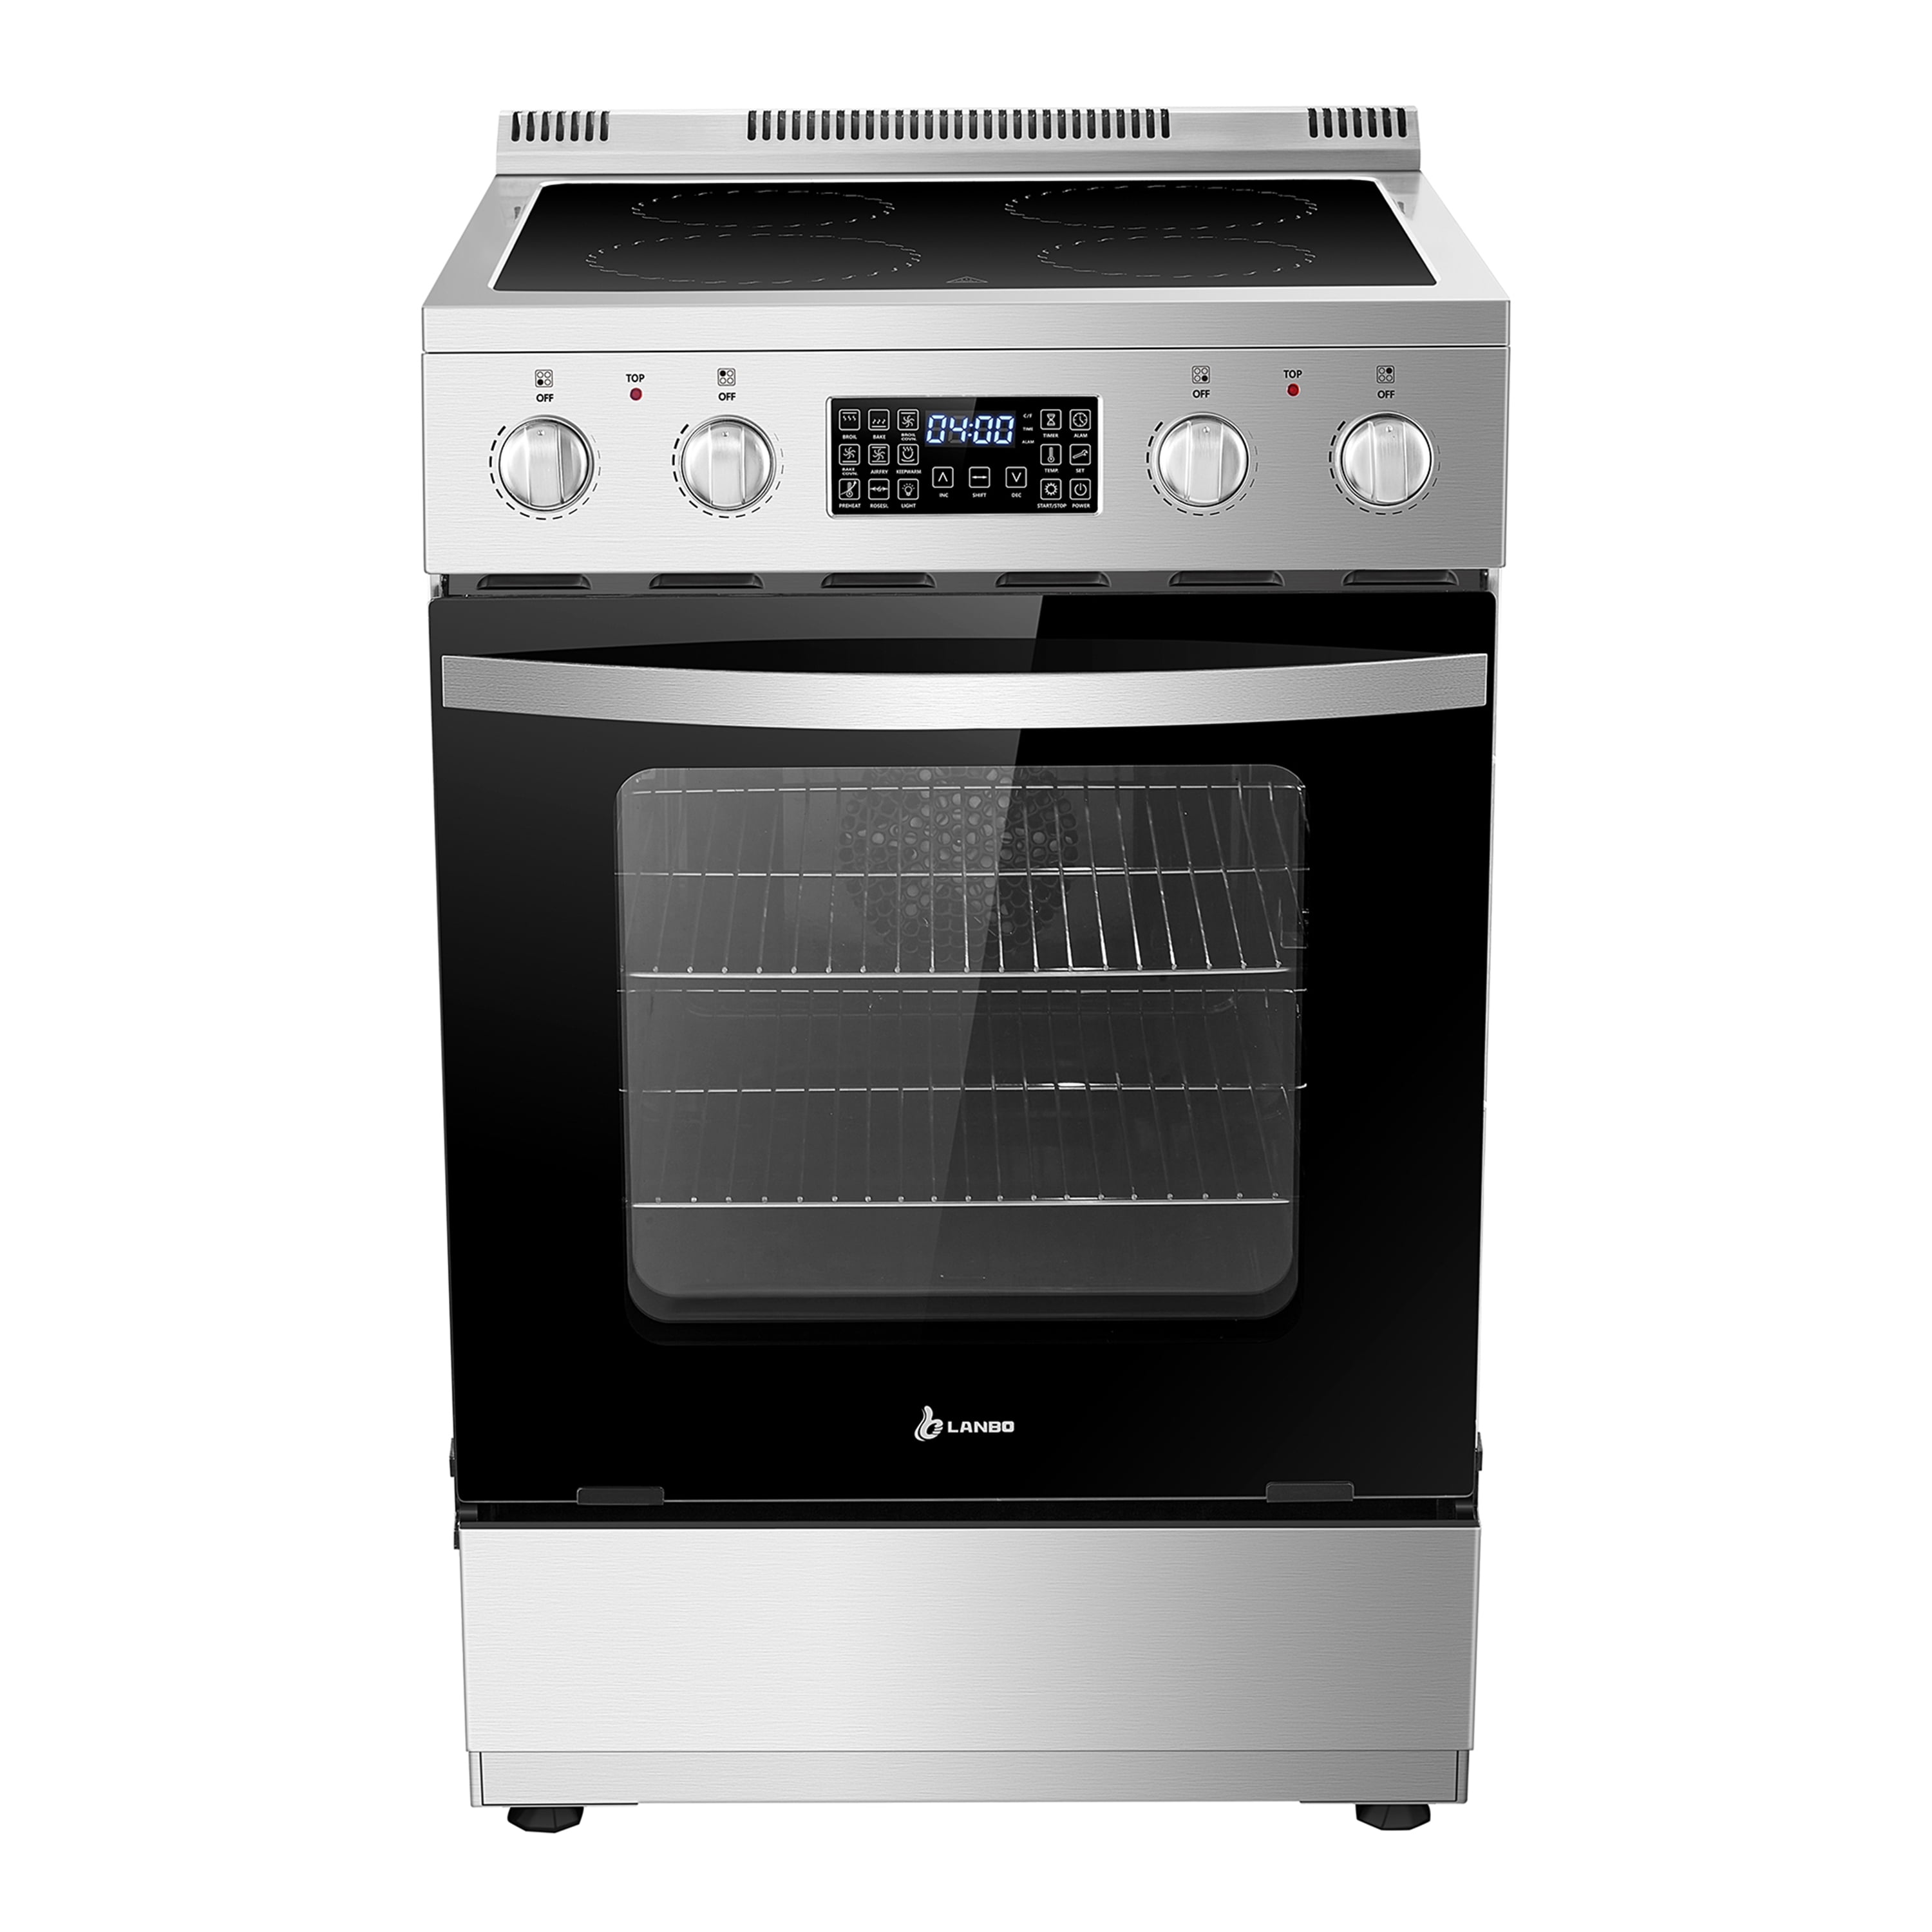 Great Freedom Festival 2023: 7 Bestsellers In Kitchen Appliances To  Opt This Sale